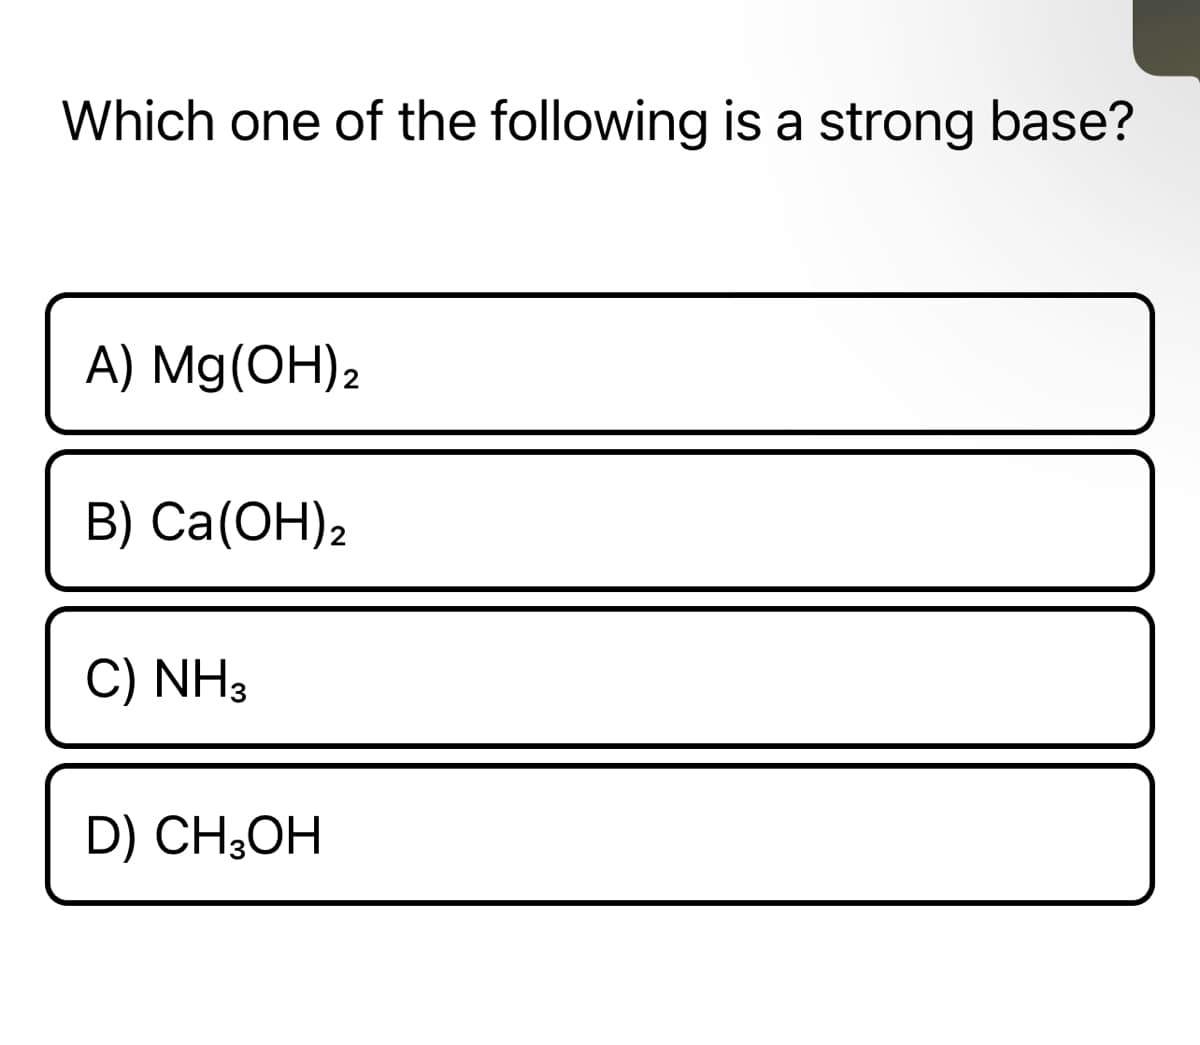 Which one of the following is a strong base?
A) Mg(OH)2
B) Ca(OH)2
C) NH3
D) CH3OH
TII